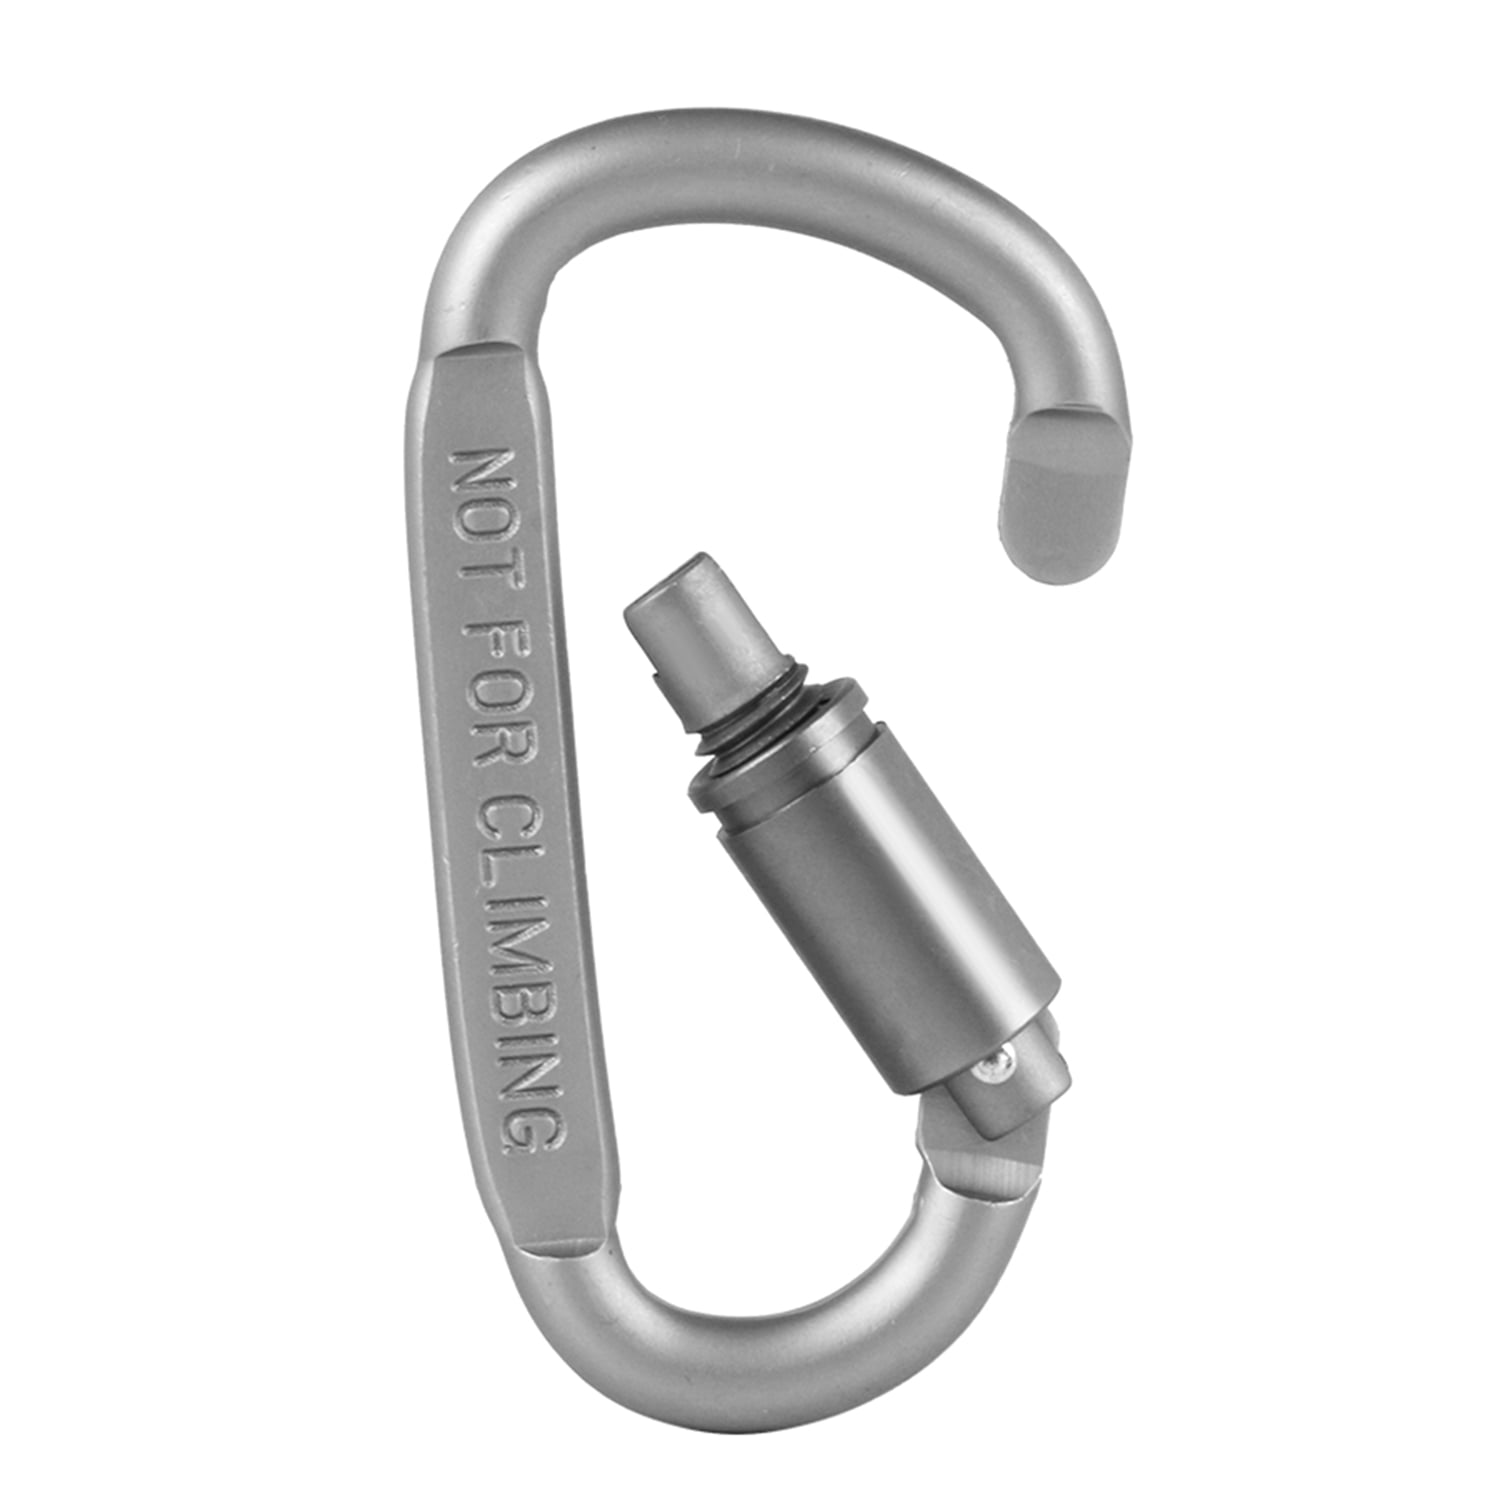 D-ring Rock Climbing Carabiner Screw Lock Hook Buckle Hiking Roofing Rescue 